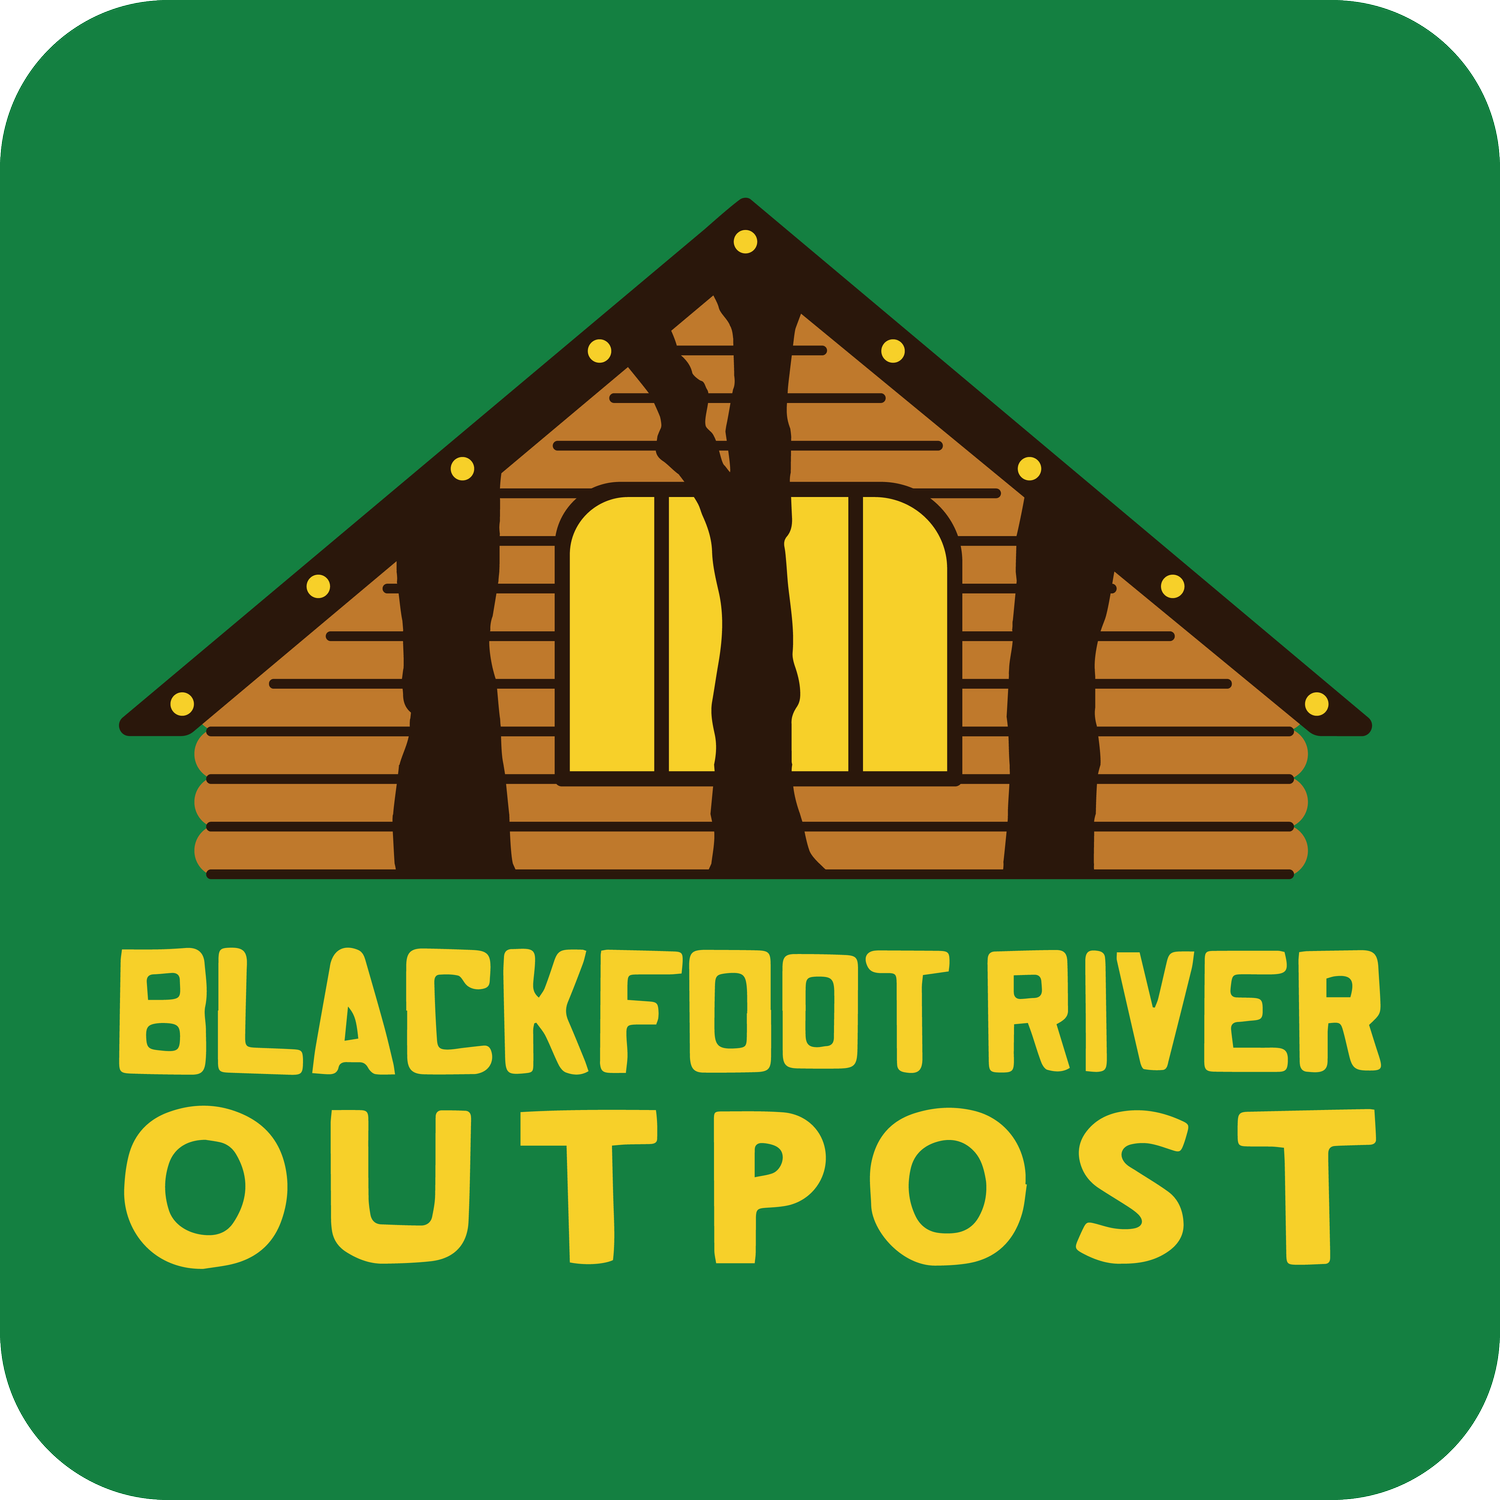 Blackfoot River Outpost